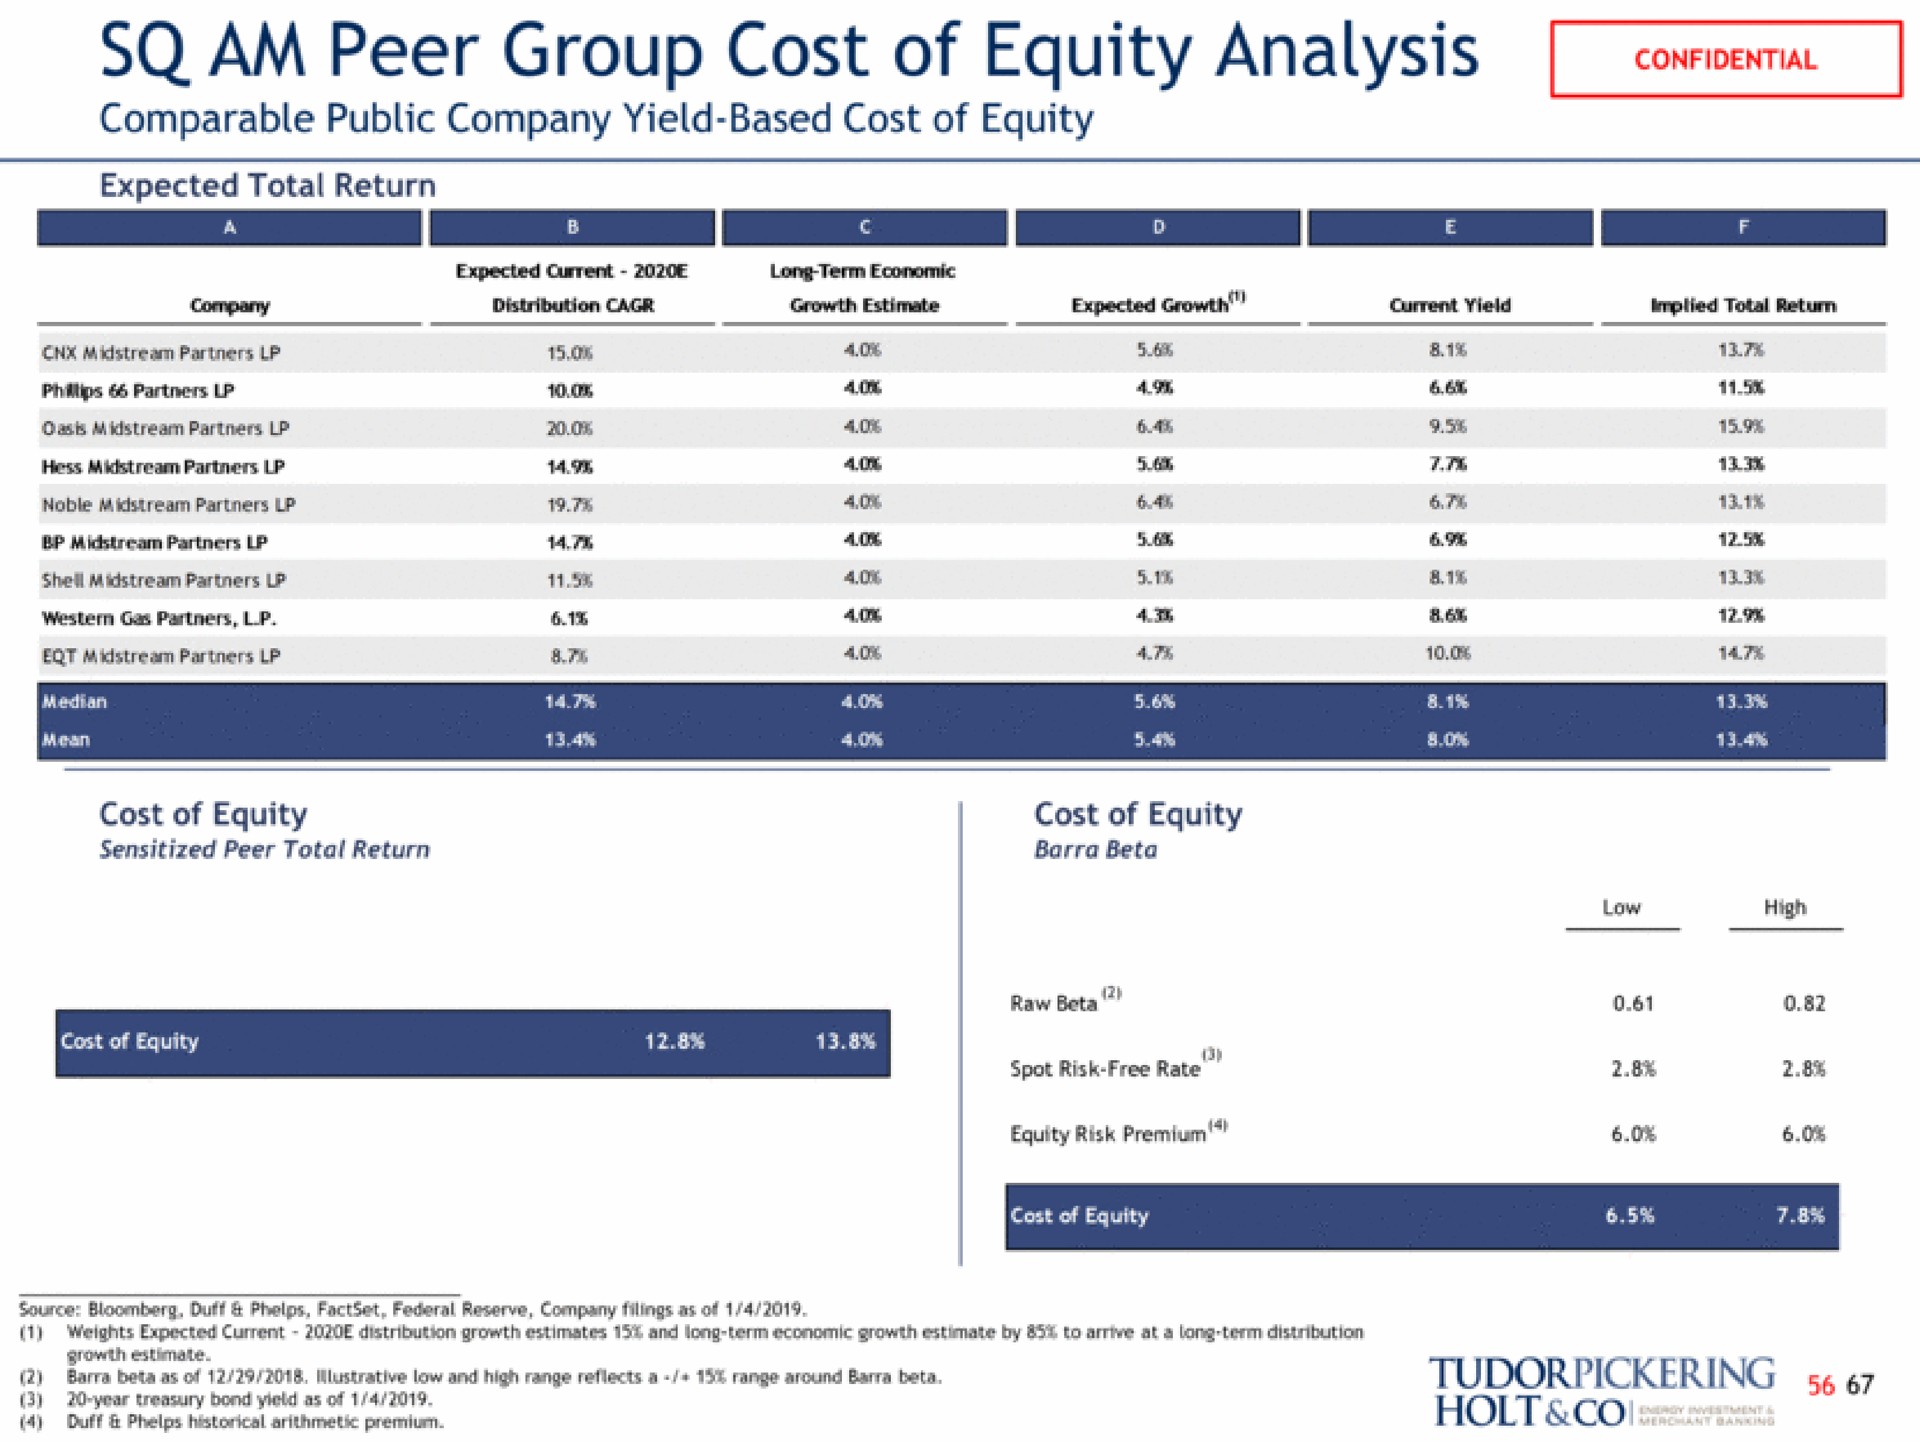 am peer group cost of equity analysis comparable public company yield based cost of equity | Tudor, Pickering, Holt & Co